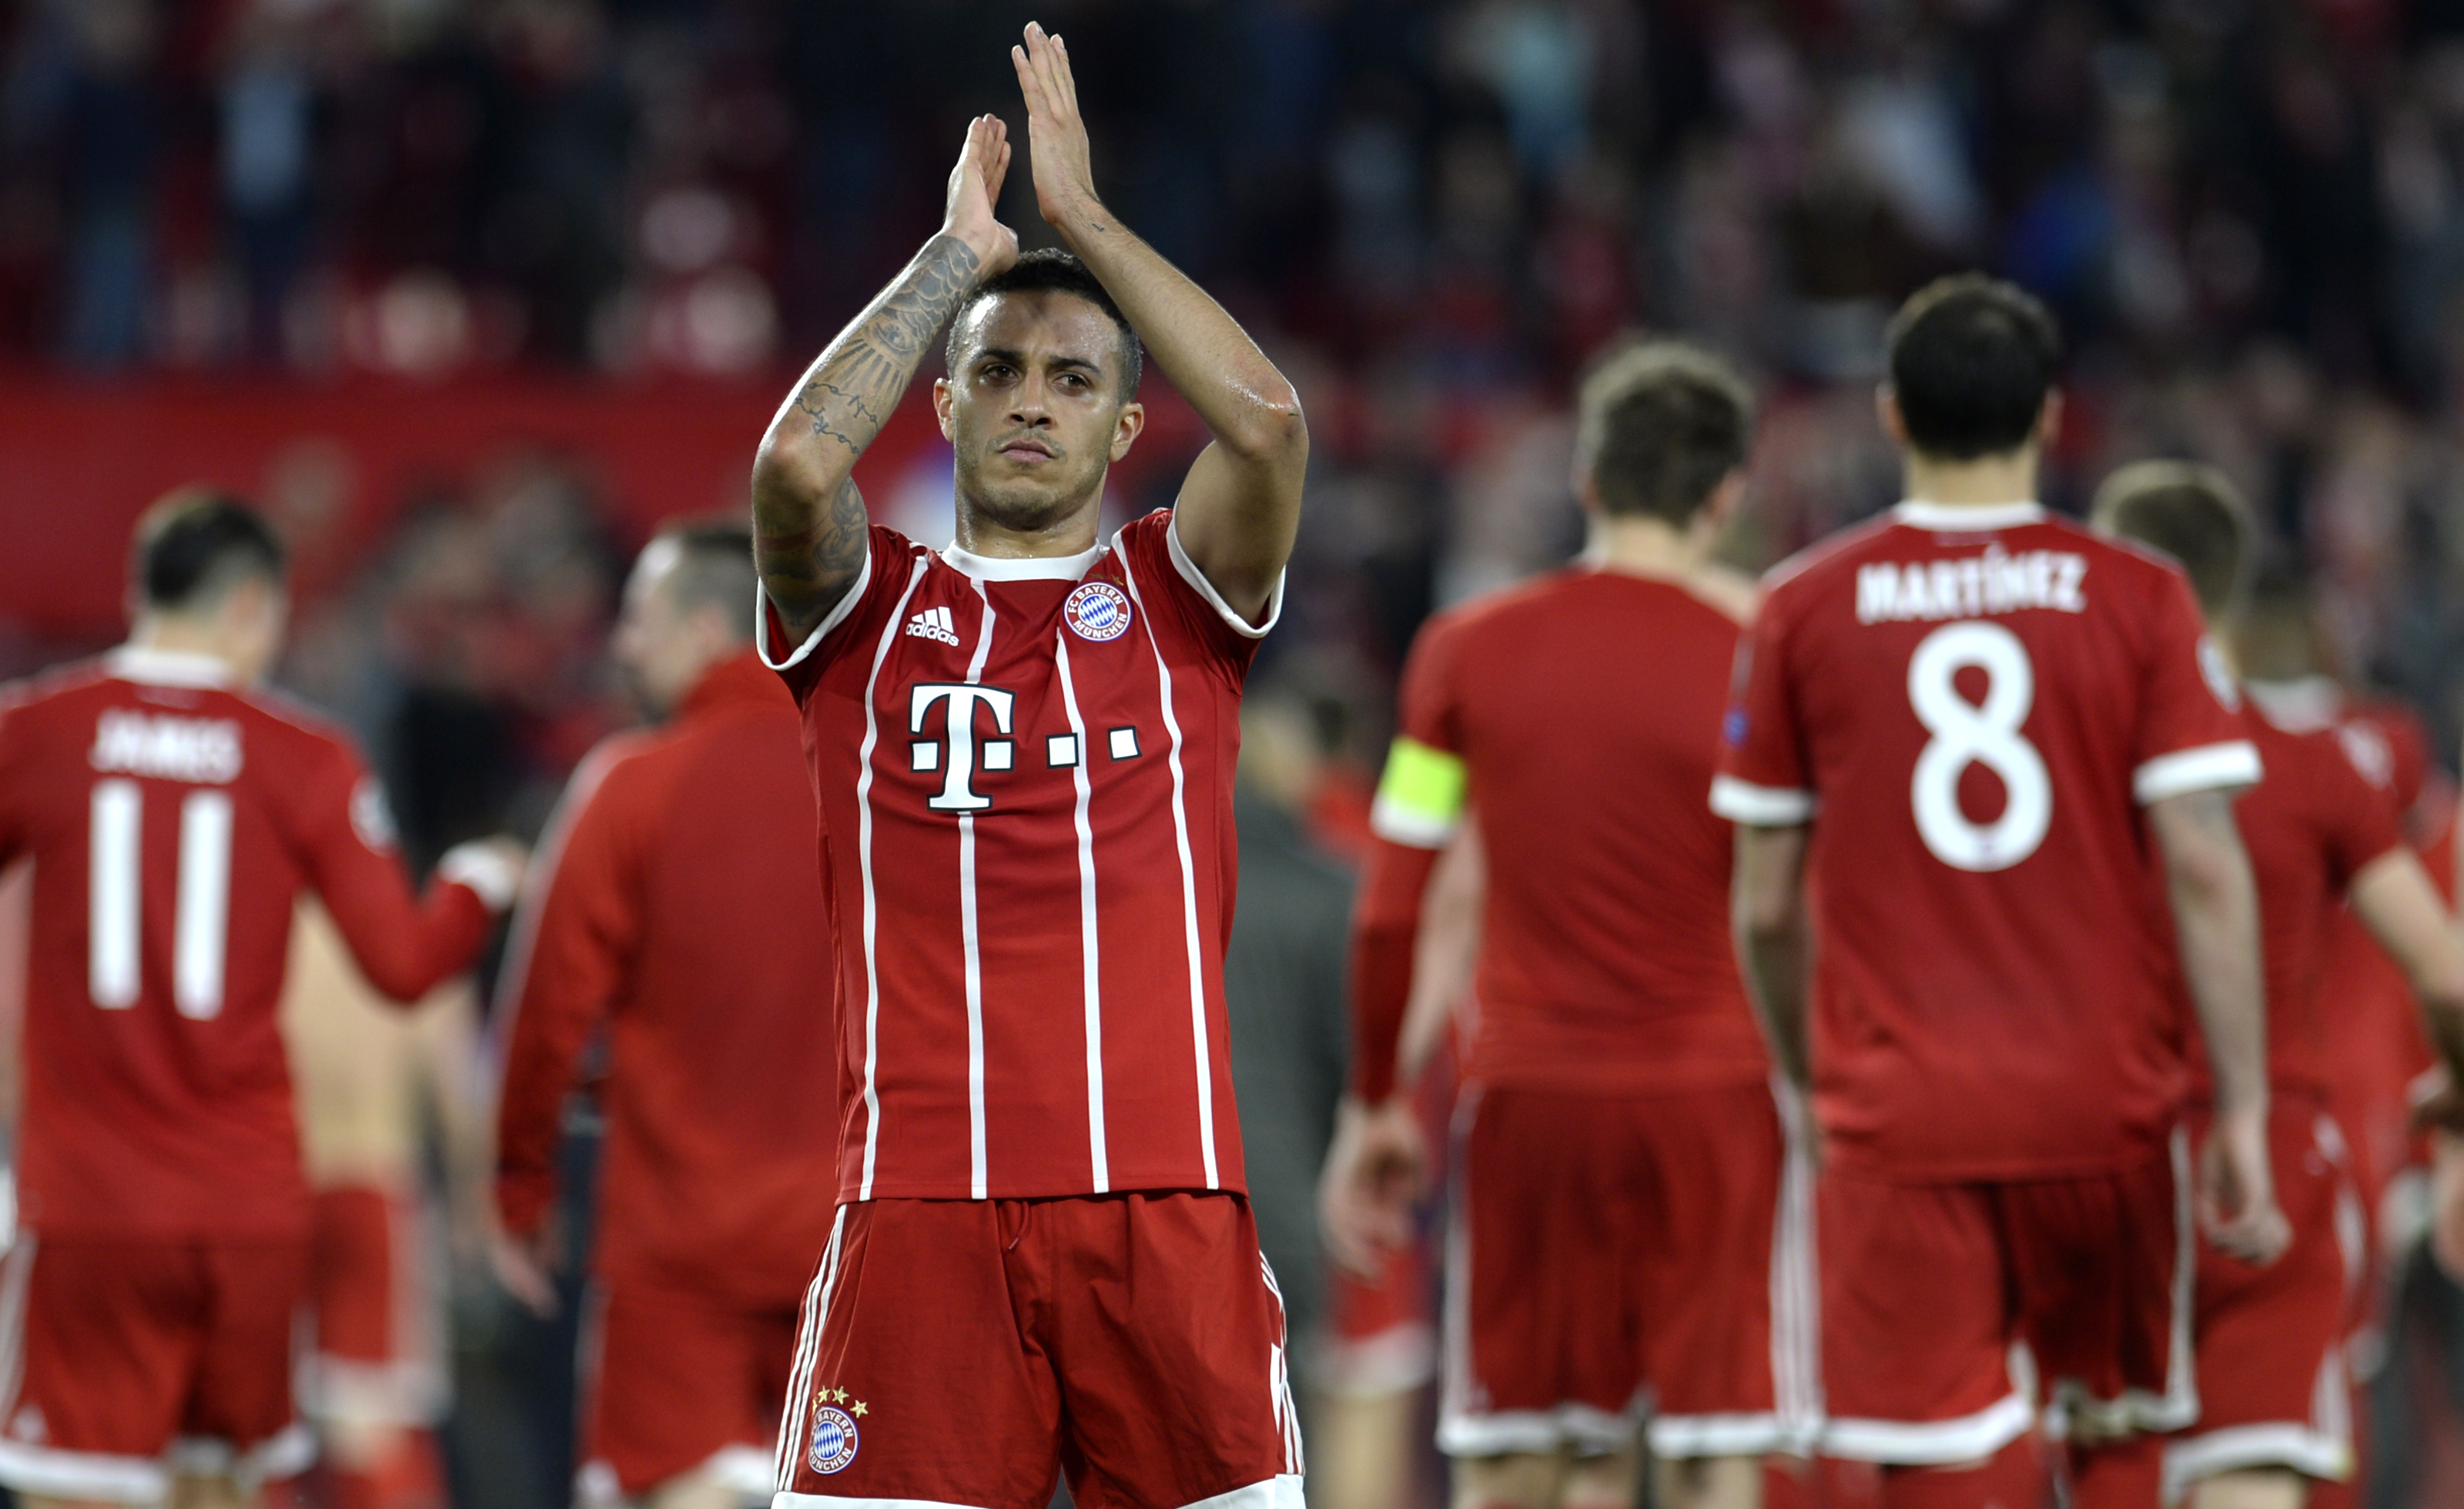 Bayern Munich's Spanish midfielder Thiago Alcantara applauds at the end of the UEFA Champions League quarter-final first leg football match between Sevilla FC and Bayern Munich at the Ramon Sanchez Pizjuan Stadium in Sevilla on April 3, 2018. / AFP PHOTO / CRISTINA QUICLER        (Photo credit should read CRISTINA QUICLER/AFP/Getty Images)